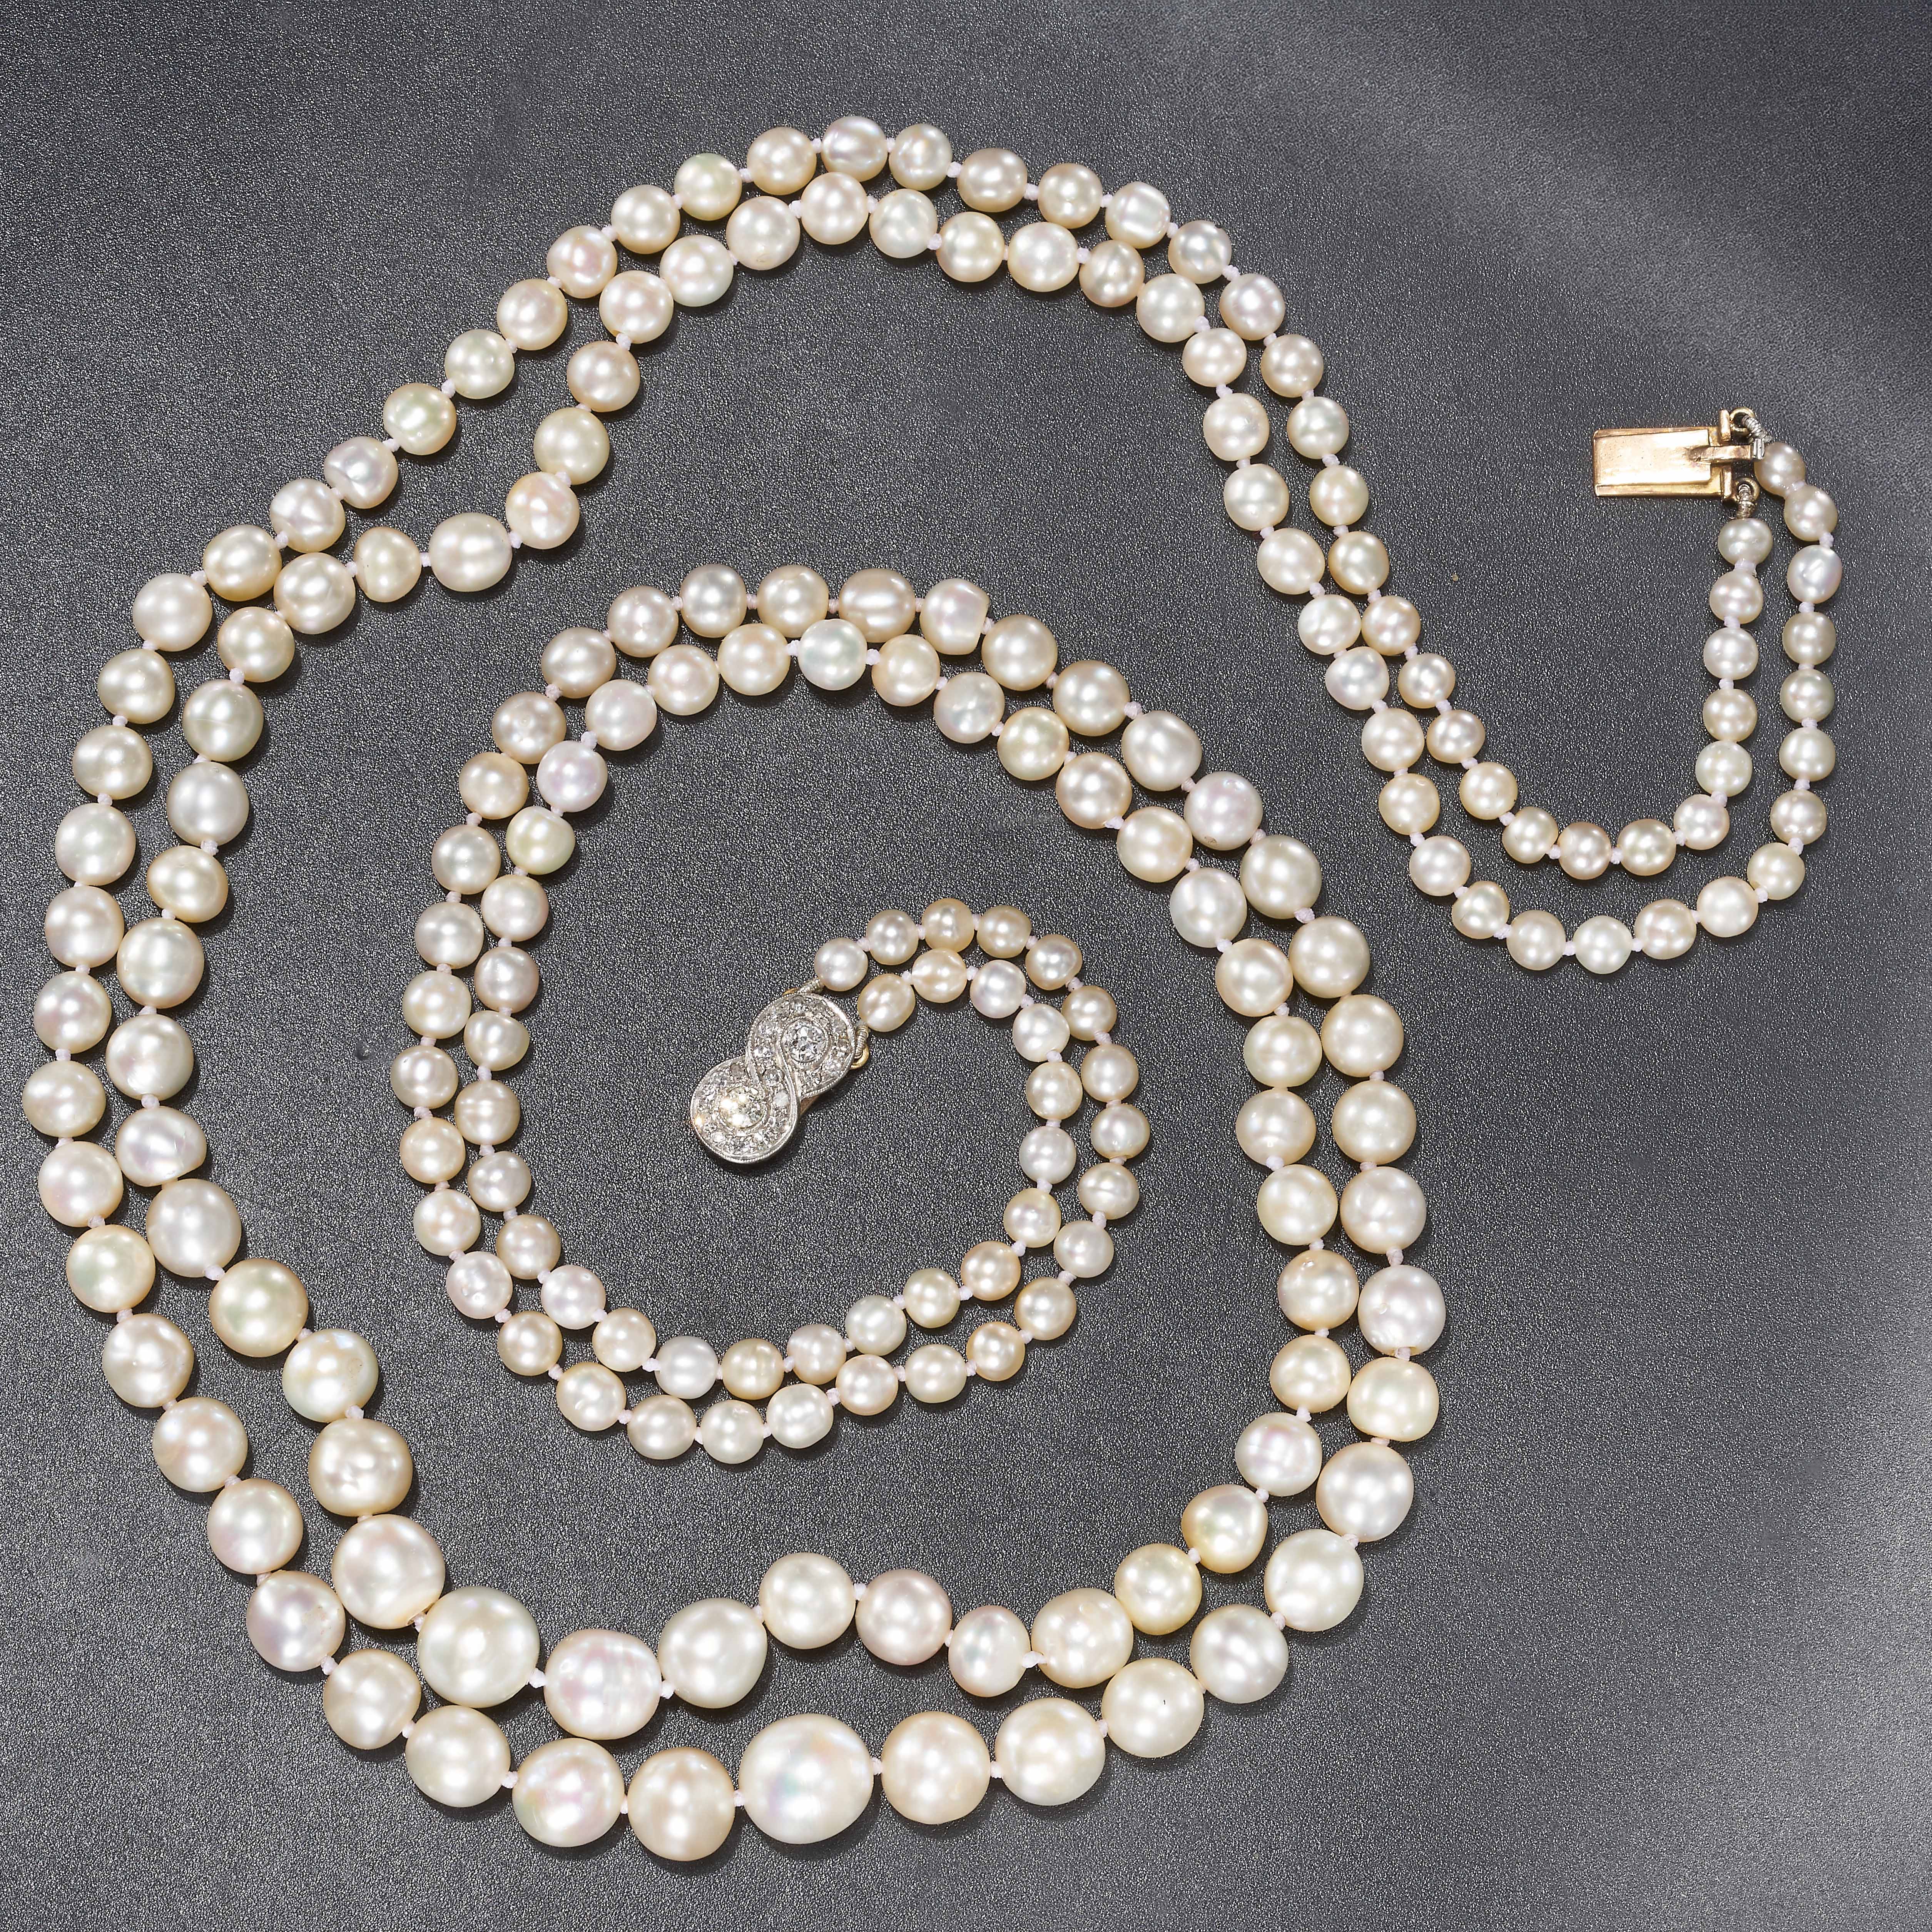 FINE CERTIFICATED NATURAL SALTWATER PEARL AND DIAMOND 2-ROW NECKLACE - Image 2 of 2